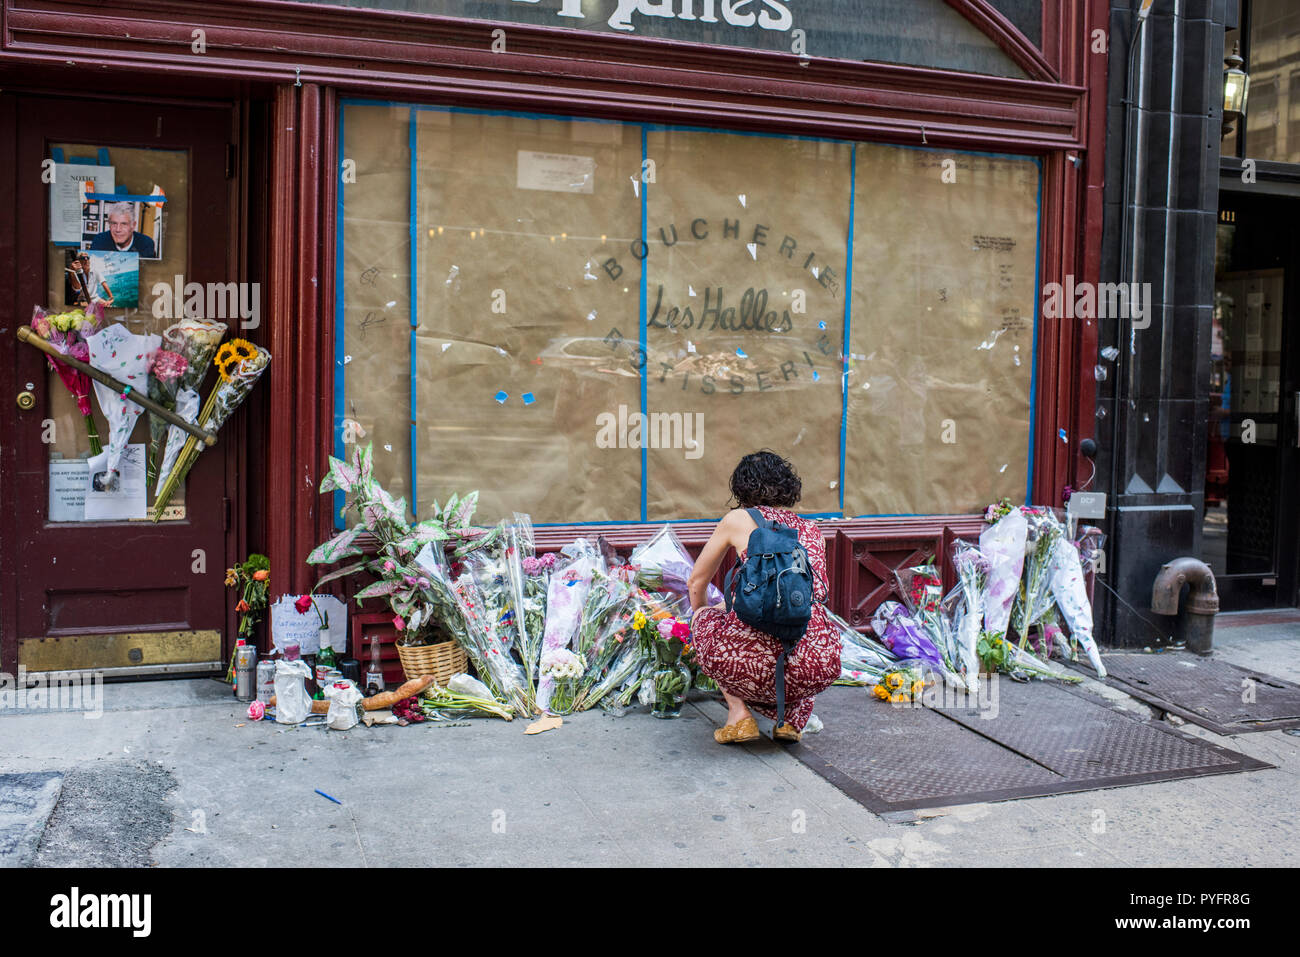 New York City, USA - June14, 2018: Fans of Anthony Bourdain leave flowers and messages in front of Brasserie Les Halles in remembrance, Park Ave South Stock Photo